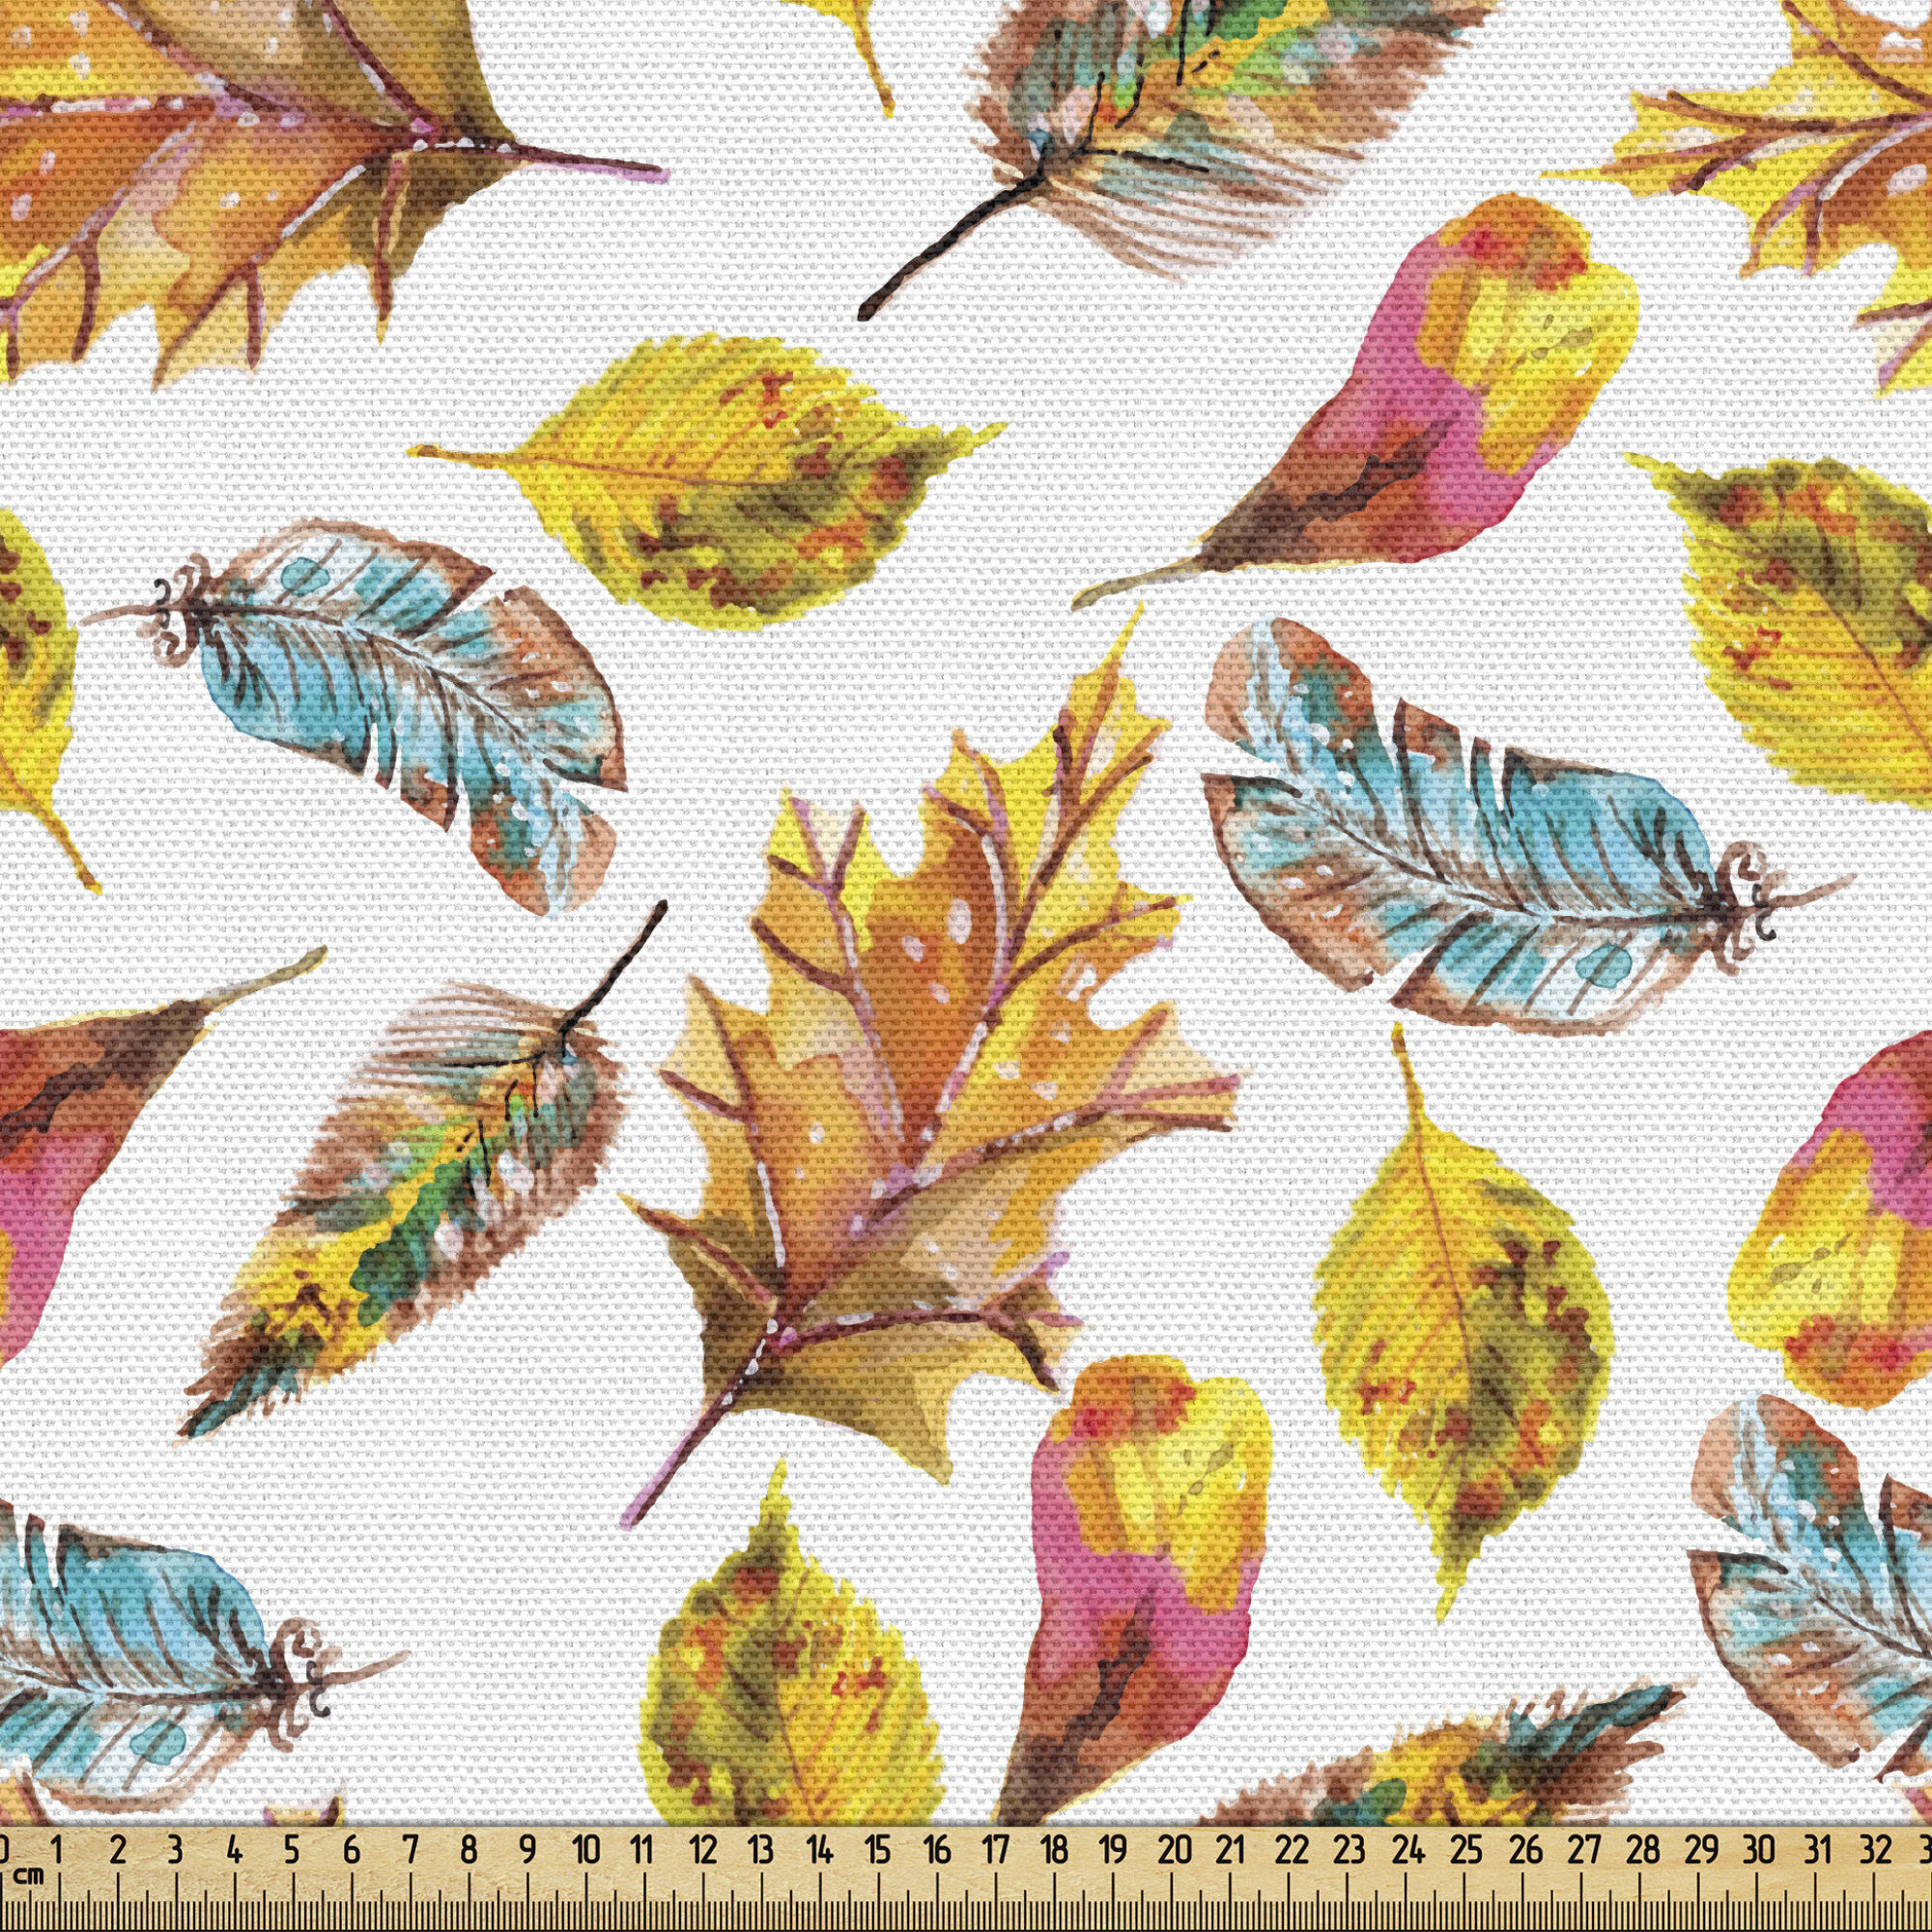 East Urban Home fab_50045_Ambesonne Watercolor Fabric By The Yard, Fall  Season Inspired Leaf Designs Nature Inspired Foliage Abstract Arrangement,  Decorative Fabric For Upholstery And Home Accents, Multicolor | Wayfair